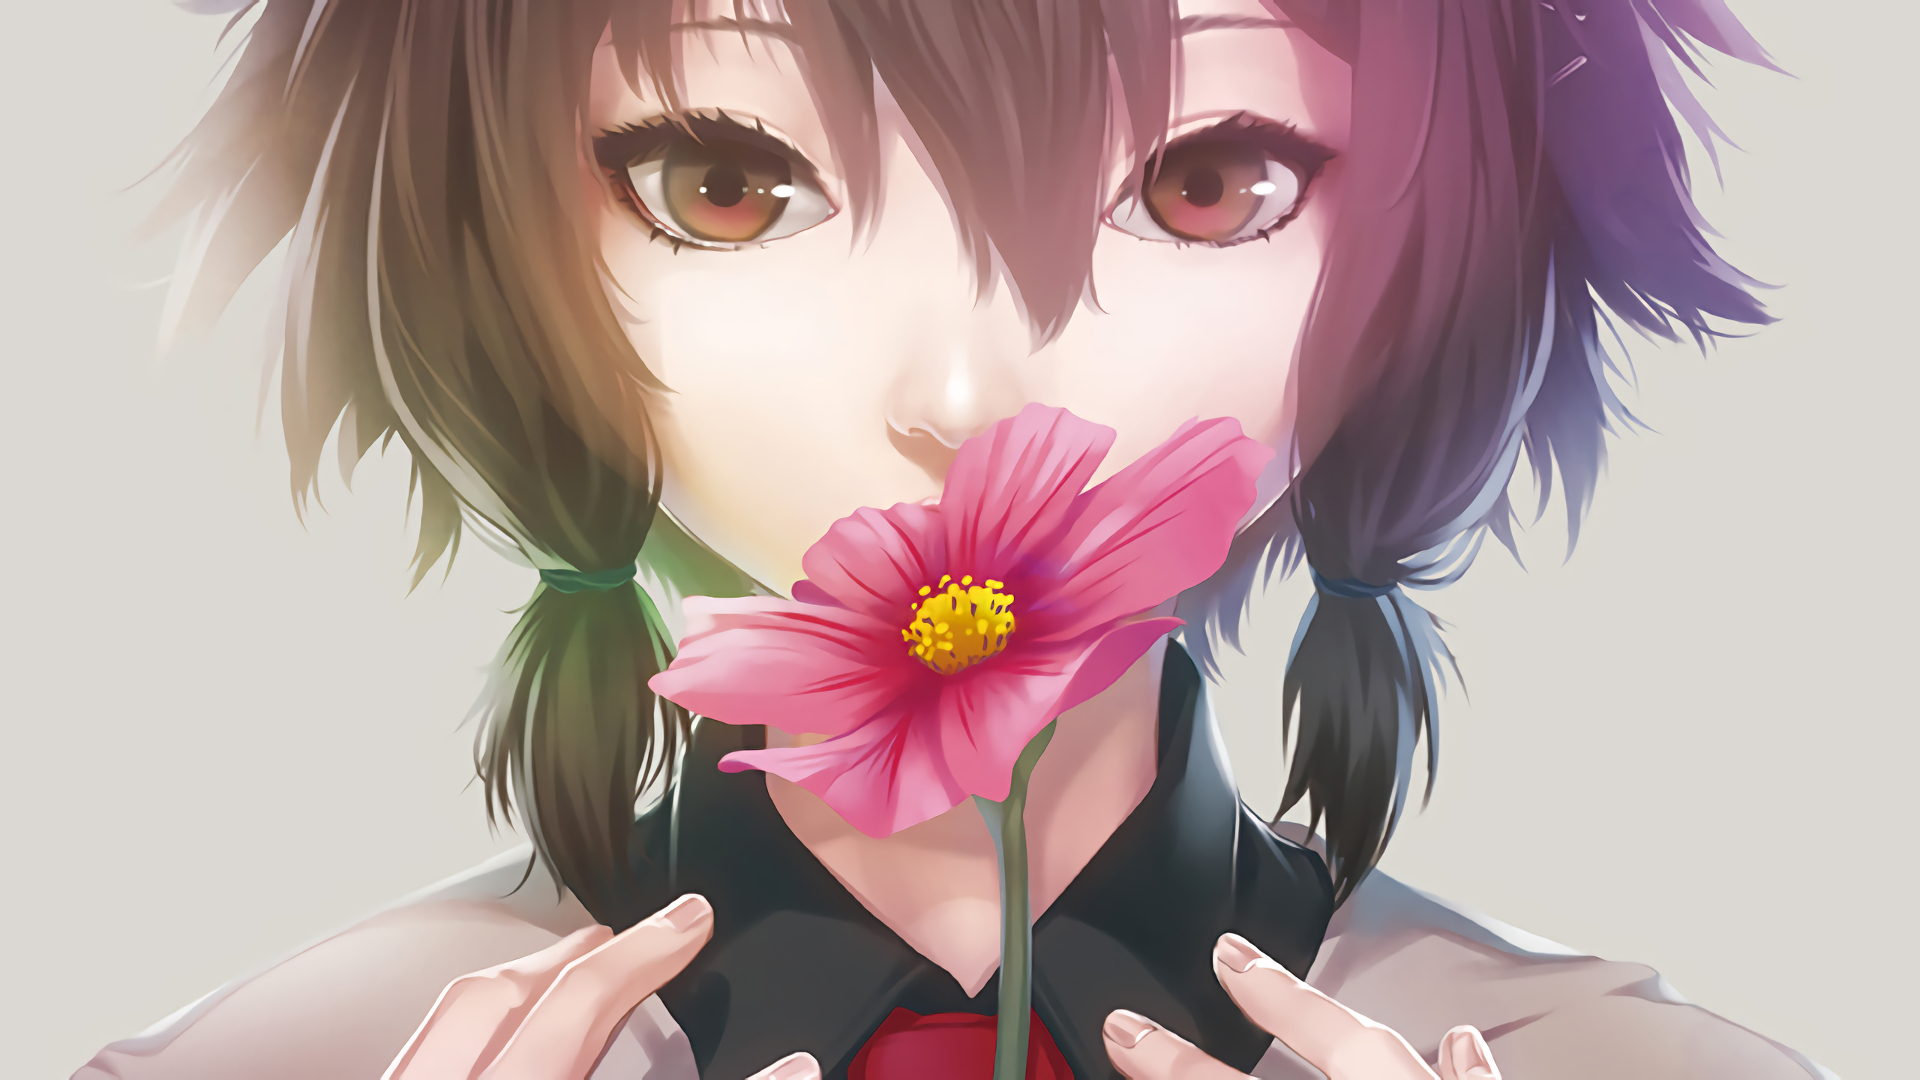 Anime girl looking at a pink flower by ニリツ